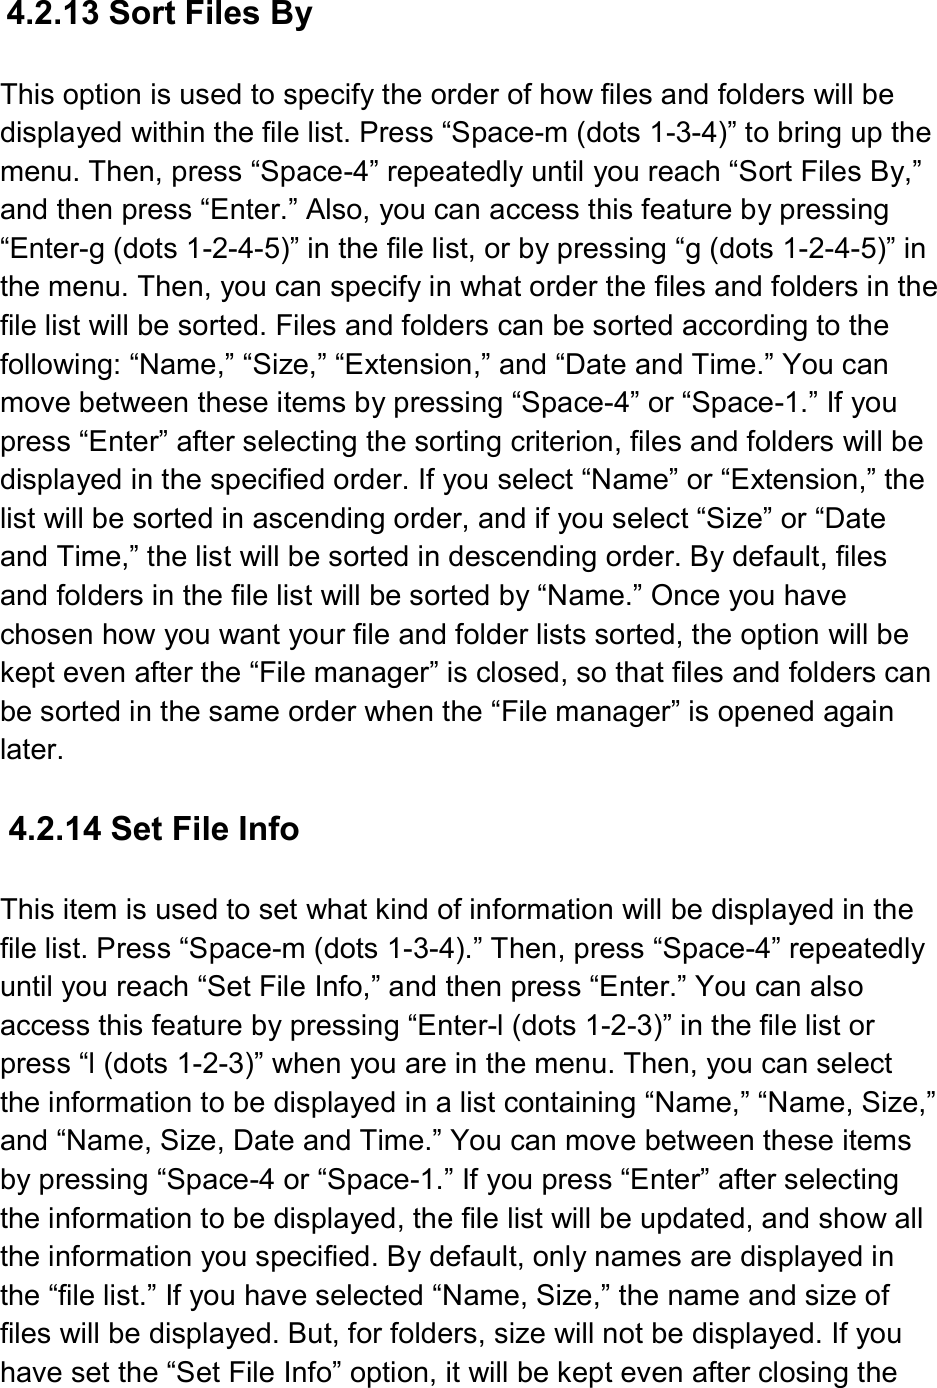  4.2.13 Sort Files By  This option is used to specify the order of how files and folders will be displayed within the file list. Press “Space-m (dots 1-3-4)” to bring up the menu. Then, press “Space-4” repeatedly until you reach “Sort Files By,” and then press “Enter.” Also, you can access this feature by pressing “Enter-g (dots 1-2-4-5)” in the file list, or by pressing “g (dots 1-2-4-5)” in the menu. Then, you can specify in what order the files and folders in the file list will be sorted. Files and folders can be sorted according to the following: “Name,” “Size,” “Extension,” and “Date and Time.” You can move between these items by pressing “Space-4” or “Space-1.” If you press “Enter” after selecting the sorting criterion, files and folders will be displayed in the specified order. If you select “Name” or “Extension,” the list will be sorted in ascending order, and if you select “Size” or “Date and Time,” the list will be sorted in descending order. By default, files and folders in the file list will be sorted by “Name.” Once you have chosen how you want your file and folder lists sorted, the option will be kept even after the “File manager” is closed, so that files and folders can be sorted in the same order when the “File manager” is opened again later.  4.2.14 Set File Info  This item is used to set what kind of information will be displayed in the file list. Press “Space-m (dots 1-3-4).” Then, press “Space-4” repeatedly until you reach “Set File Info,” and then press “Enter.” You can also access this feature by pressing “Enter-l (dots 1-2-3)” in the file list or press “l (dots 1-2-3)” when you are in the menu. Then, you can select the information to be displayed in a list containing “Name,” “Name, Size,” and “Name, Size, Date and Time.” You can move between these items by pressing “Space-4 or “Space-1.” If you press “Enter” after selecting the information to be displayed, the file list will be updated, and show all the information you specified. By default, only names are displayed in the “file list.” If you have selected “Name, Size,” the name and size of files will be displayed. But, for folders, size will not be displayed. If you have set the “Set File Info” option, it will be kept even after closing the 